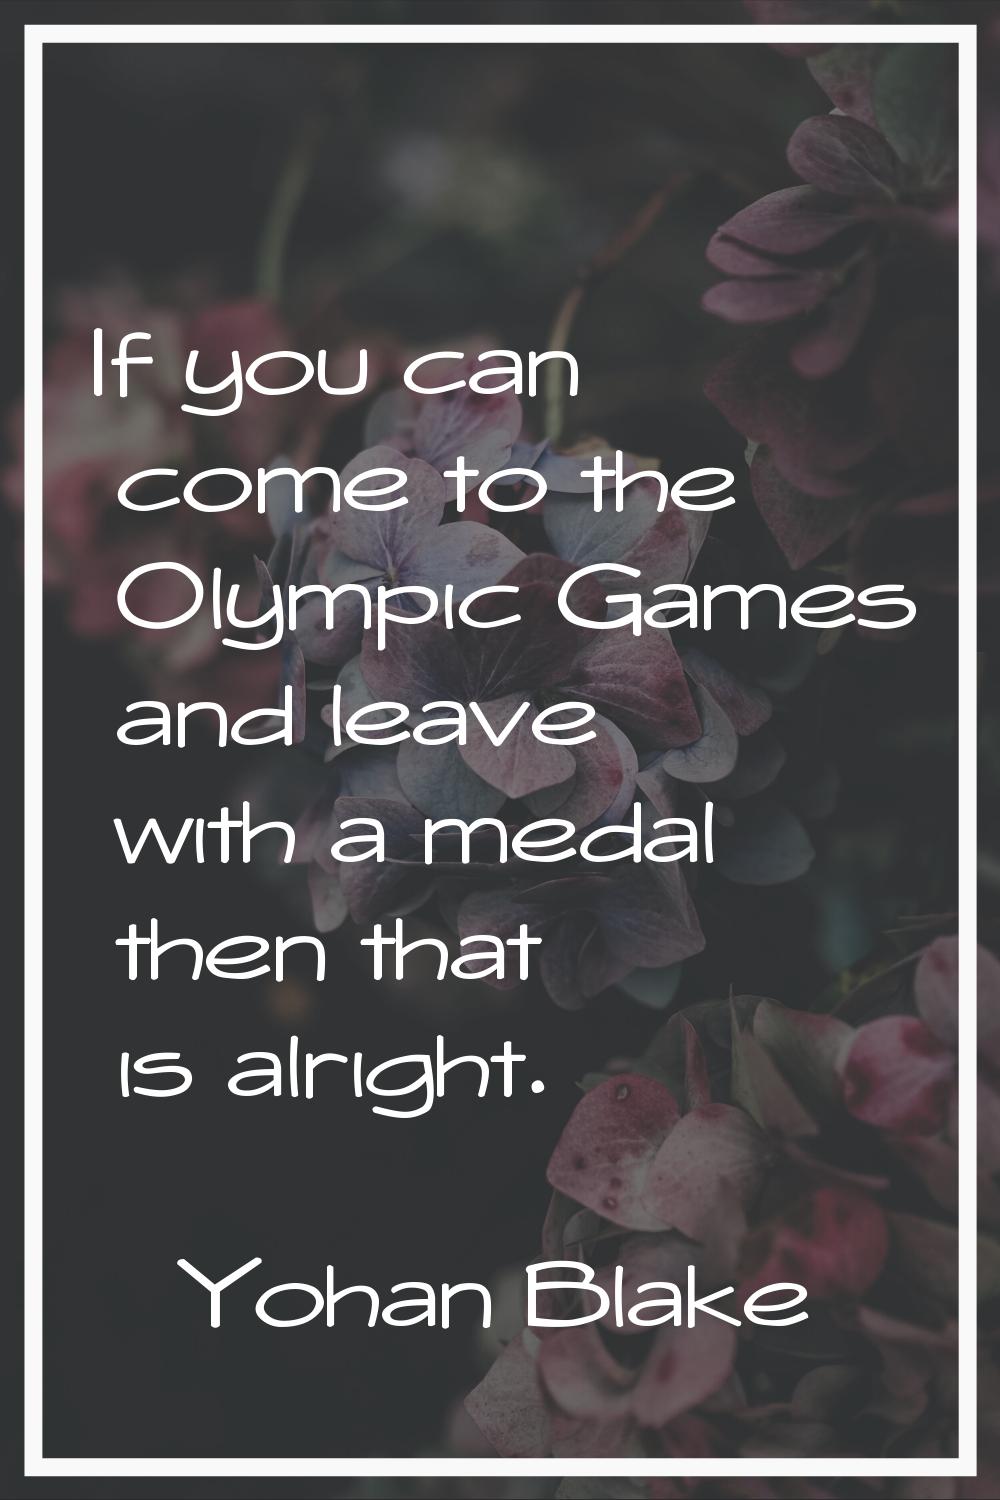 If you can come to the Olympic Games and leave with a medal then that is alright.